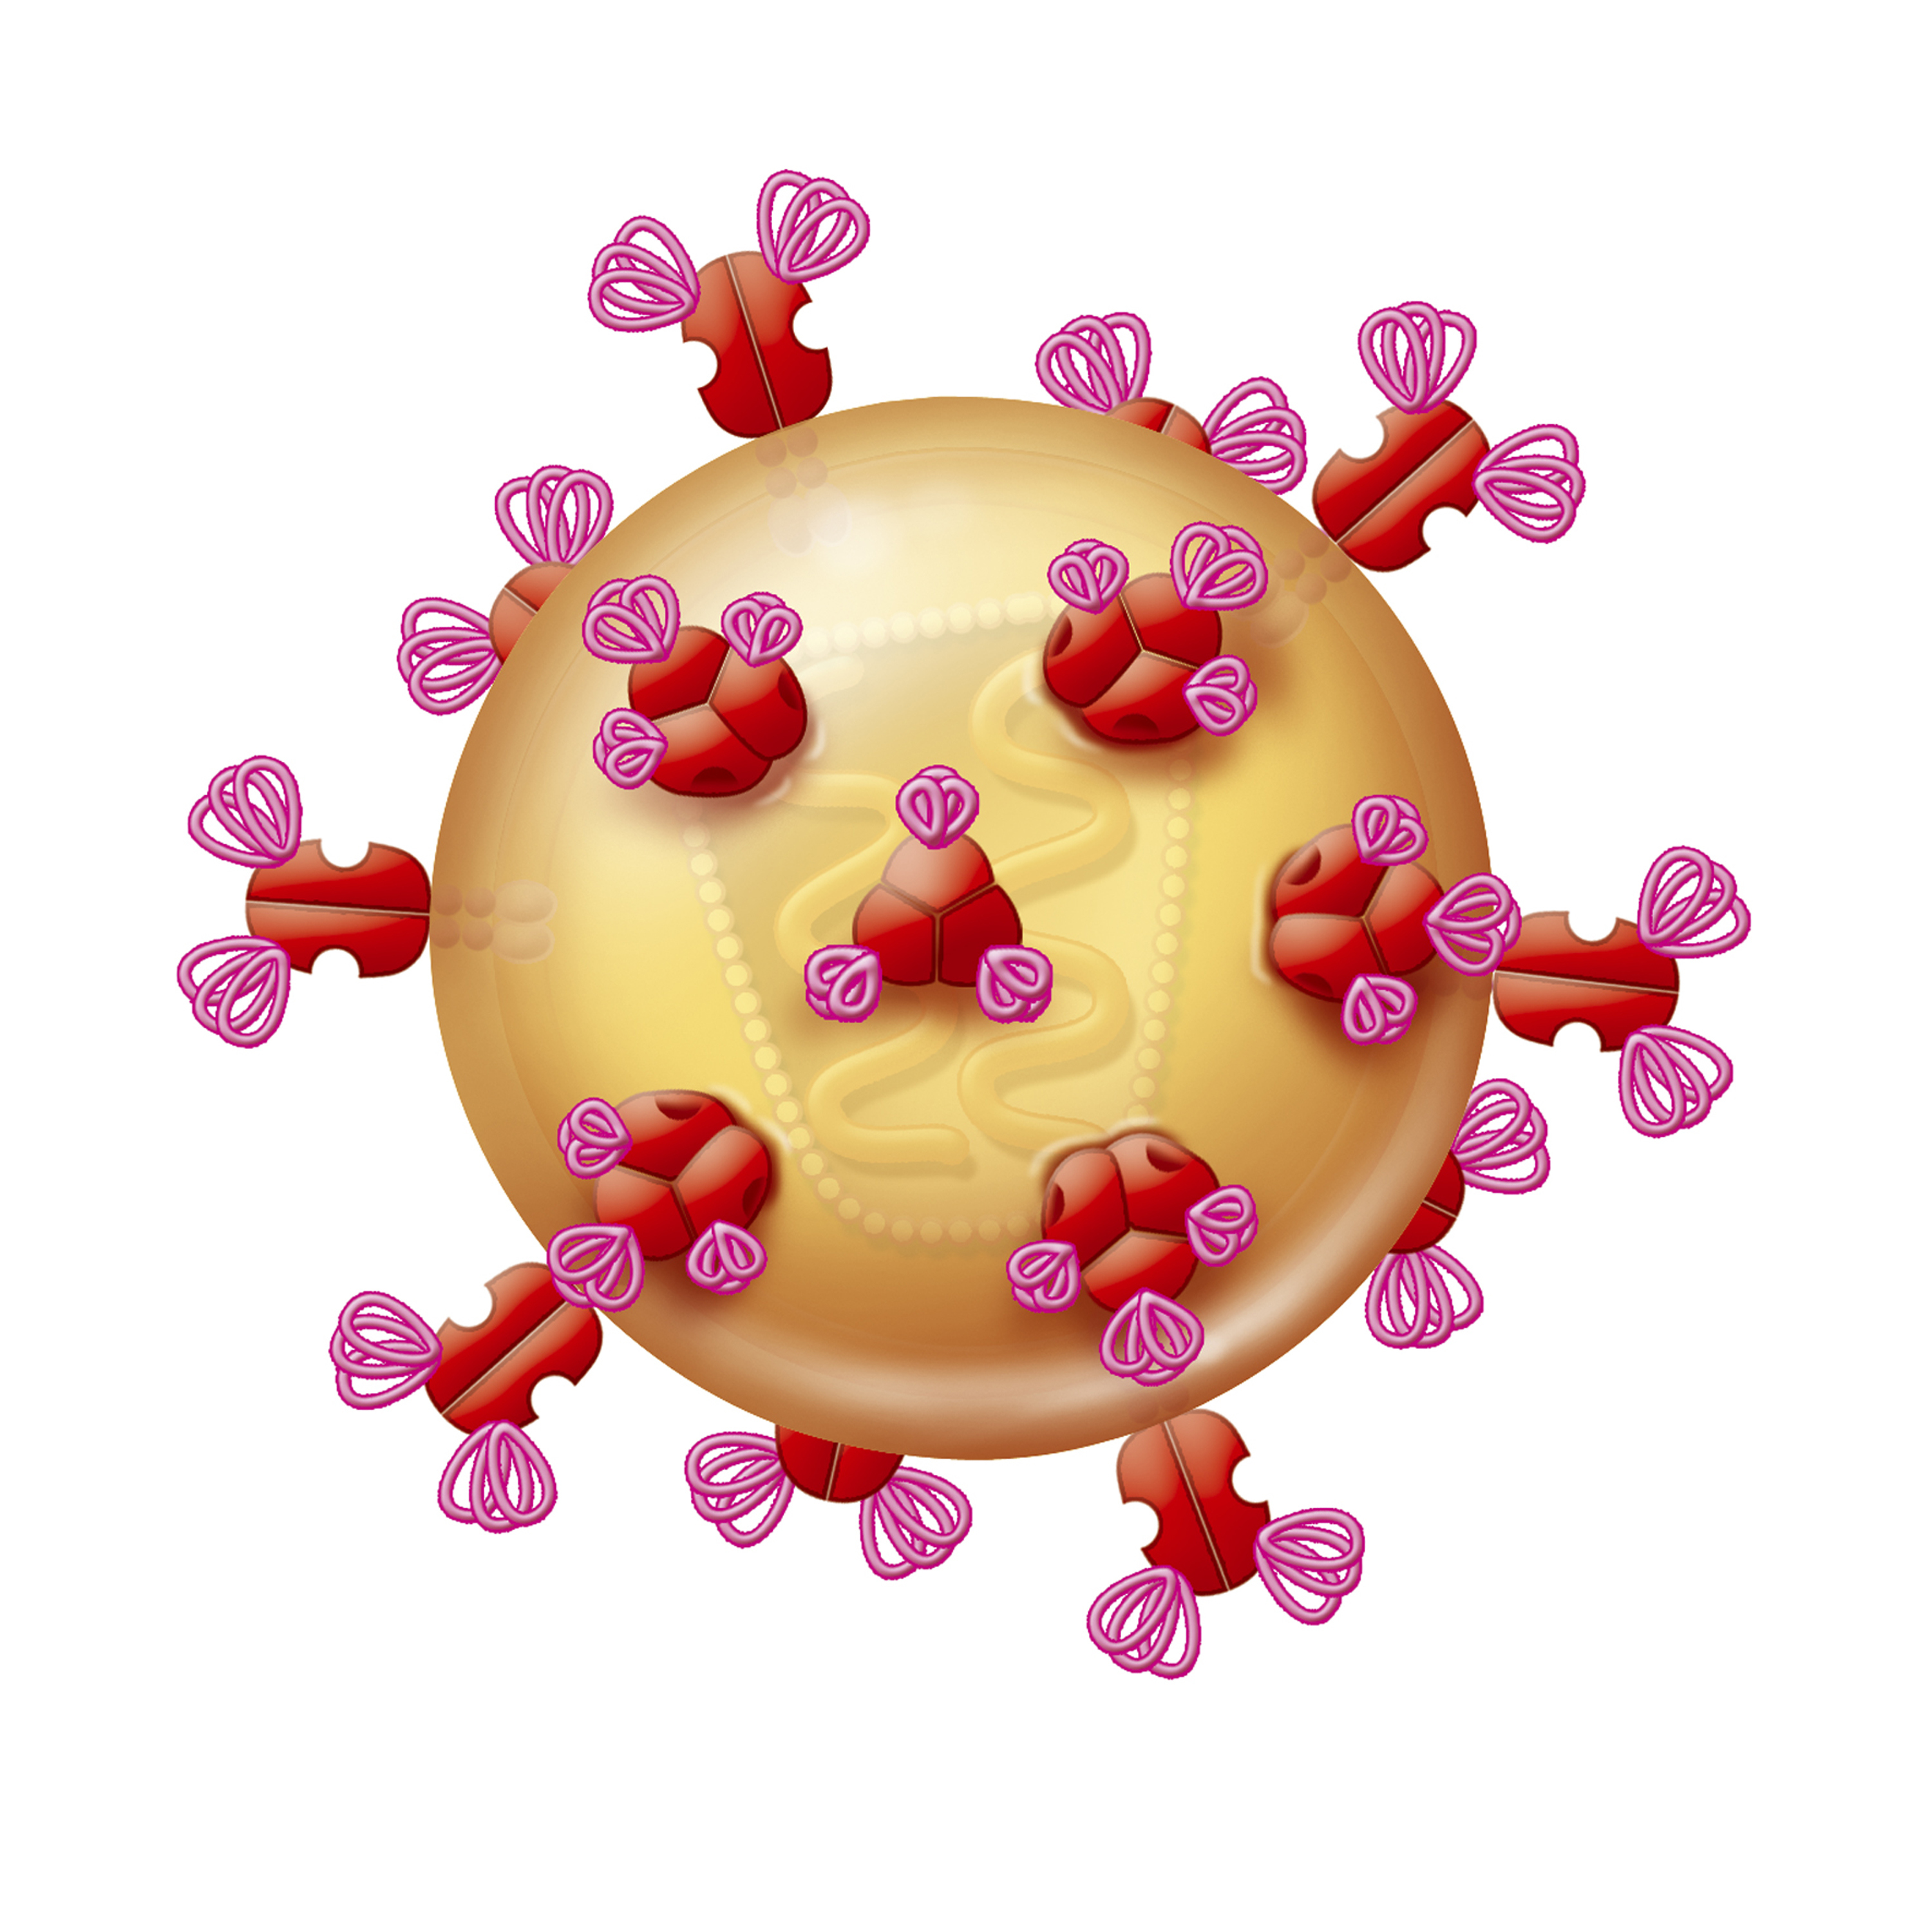 Illustration of the aids virus, showing protein membranes which enable it to attach itself to the host cells (Getty Images)